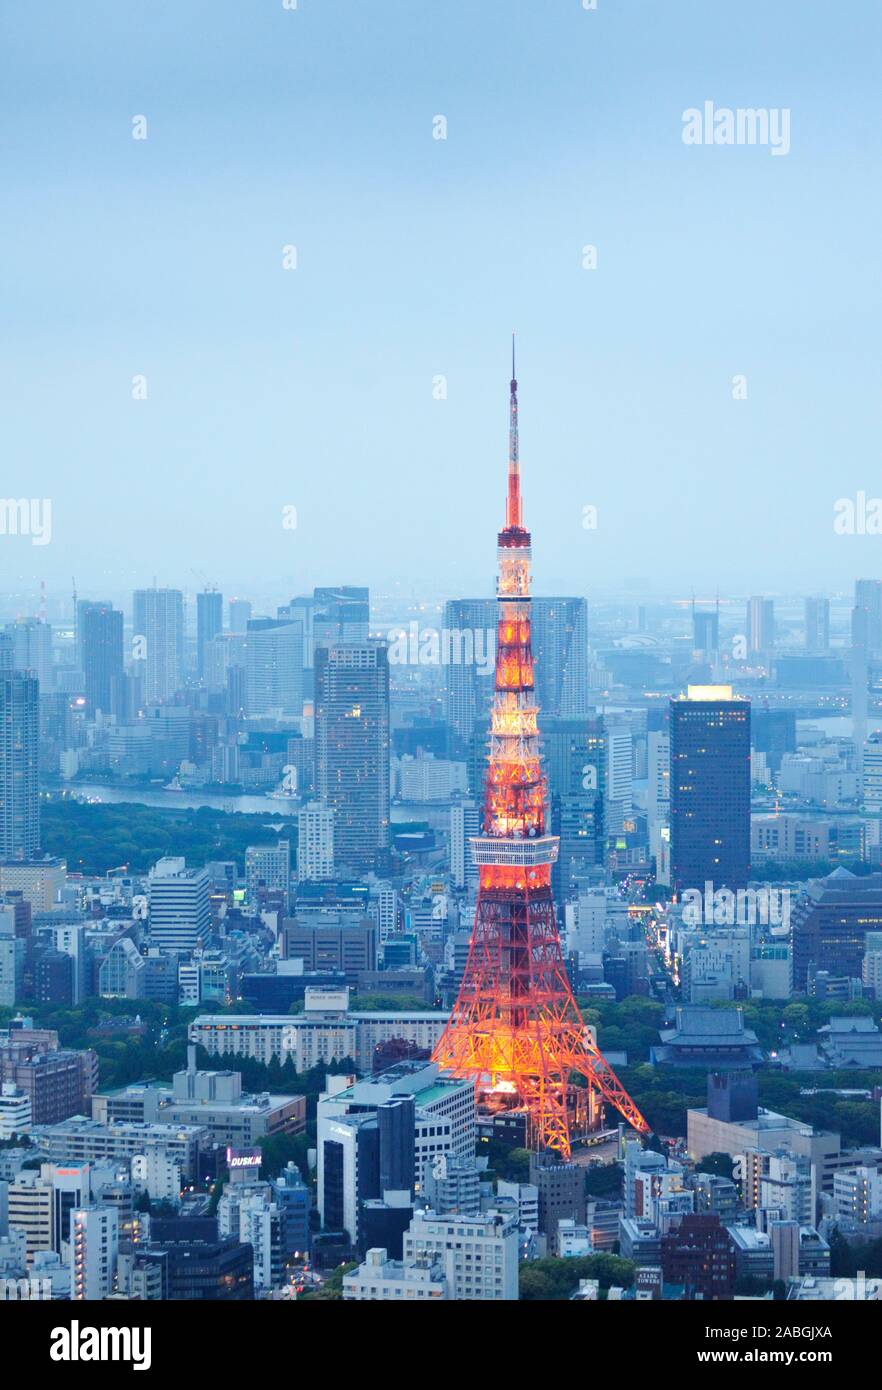 Tokyo tower and cityscape of Tokyo at dusk Stock Photo